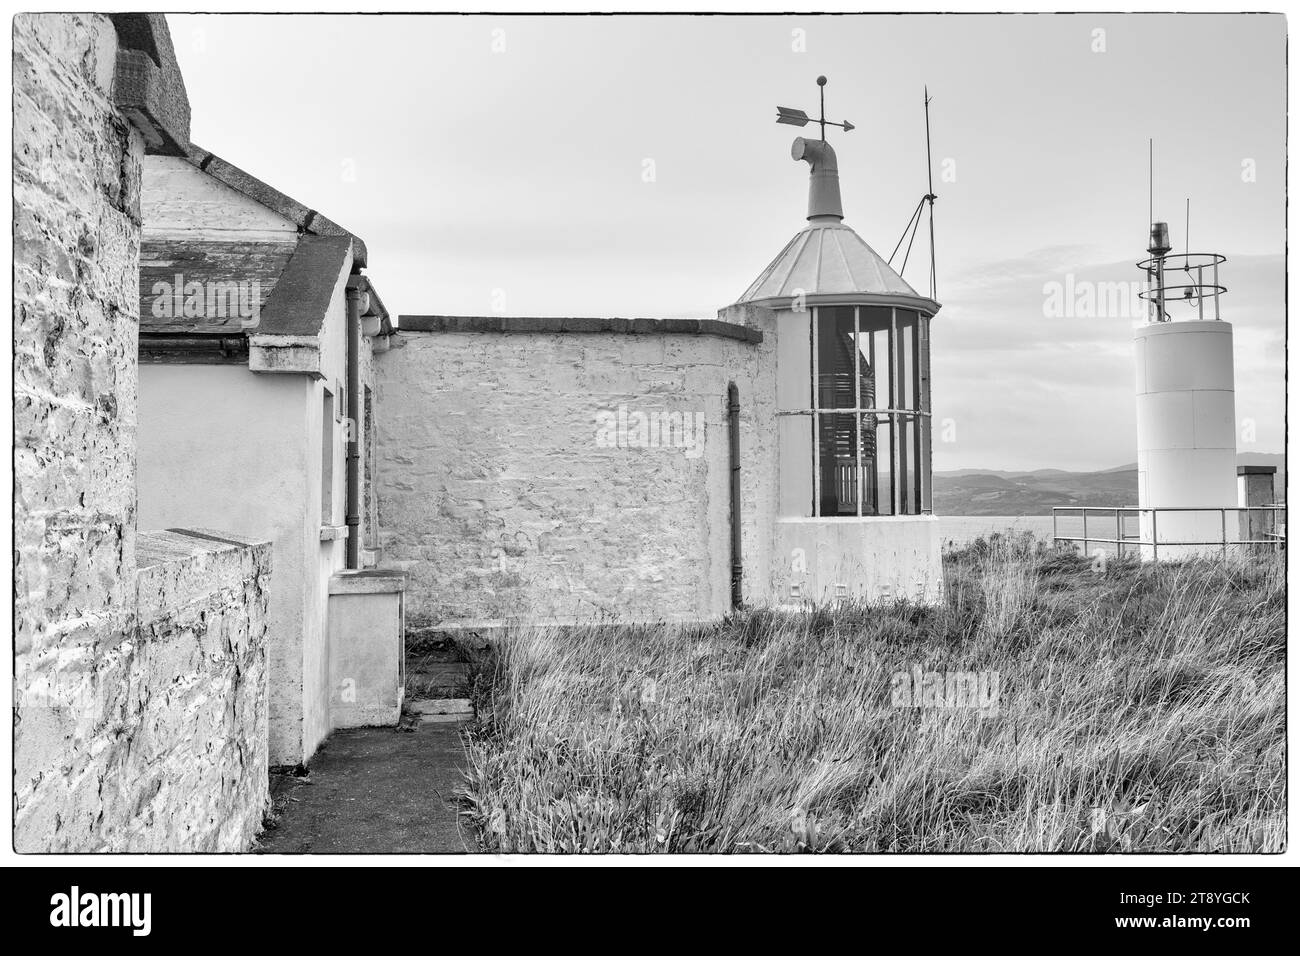 Dunree Lighthouse, County Donegal, Irland Stockfoto